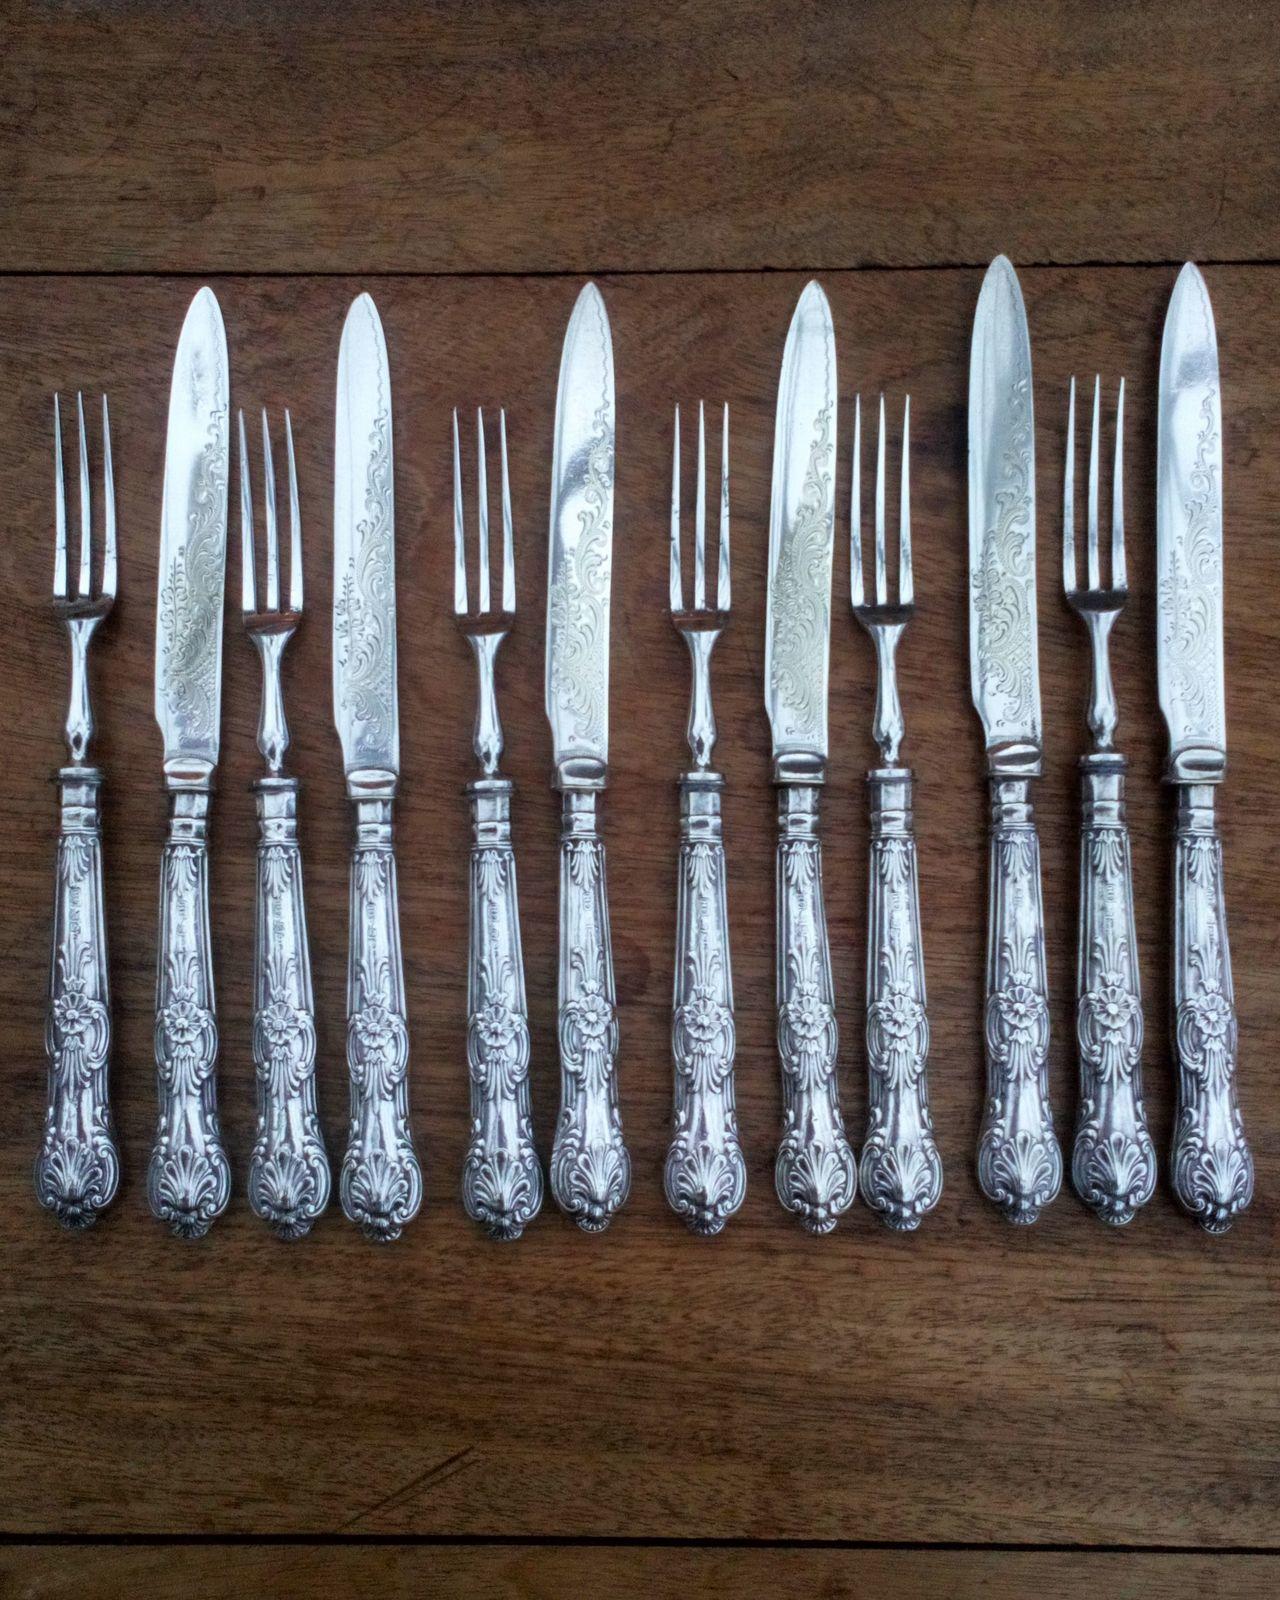 Antique Sterling silver handled dessert cutlery set for six place settings with Queens pattern handles and bright cut EPNS knife blades made by Harrison Fisher and co of Sheffield 12 pieces hallmarked 925 sterling silver and date letter i for 1901.